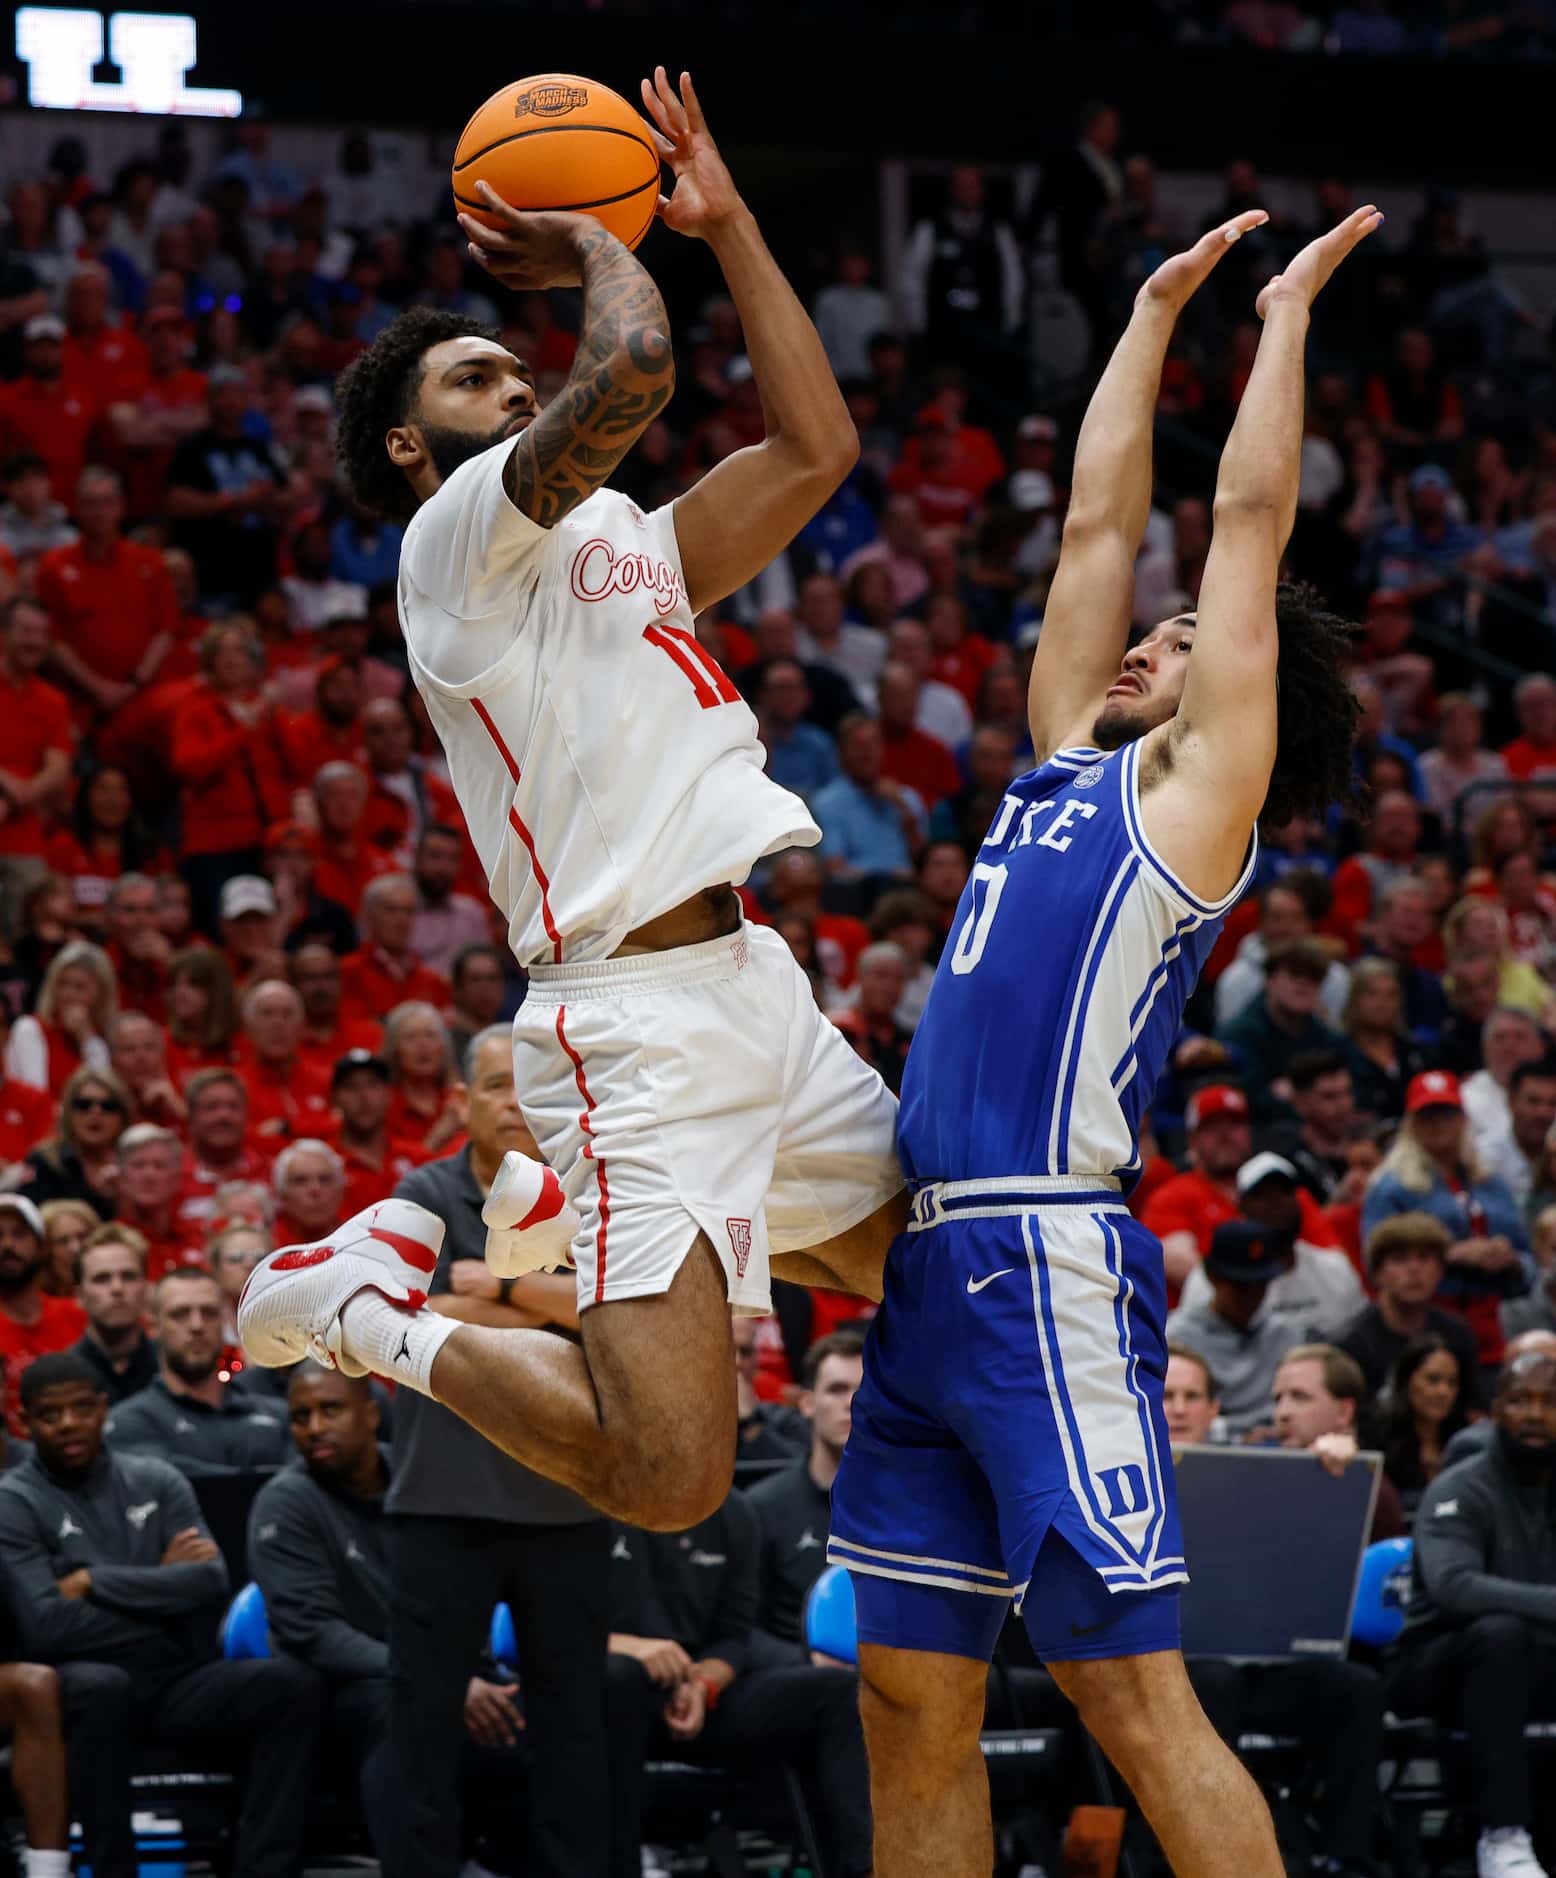 Houston guard Damian Dunn (11) shoots over Duke guard Jared McCain (0) during the second...